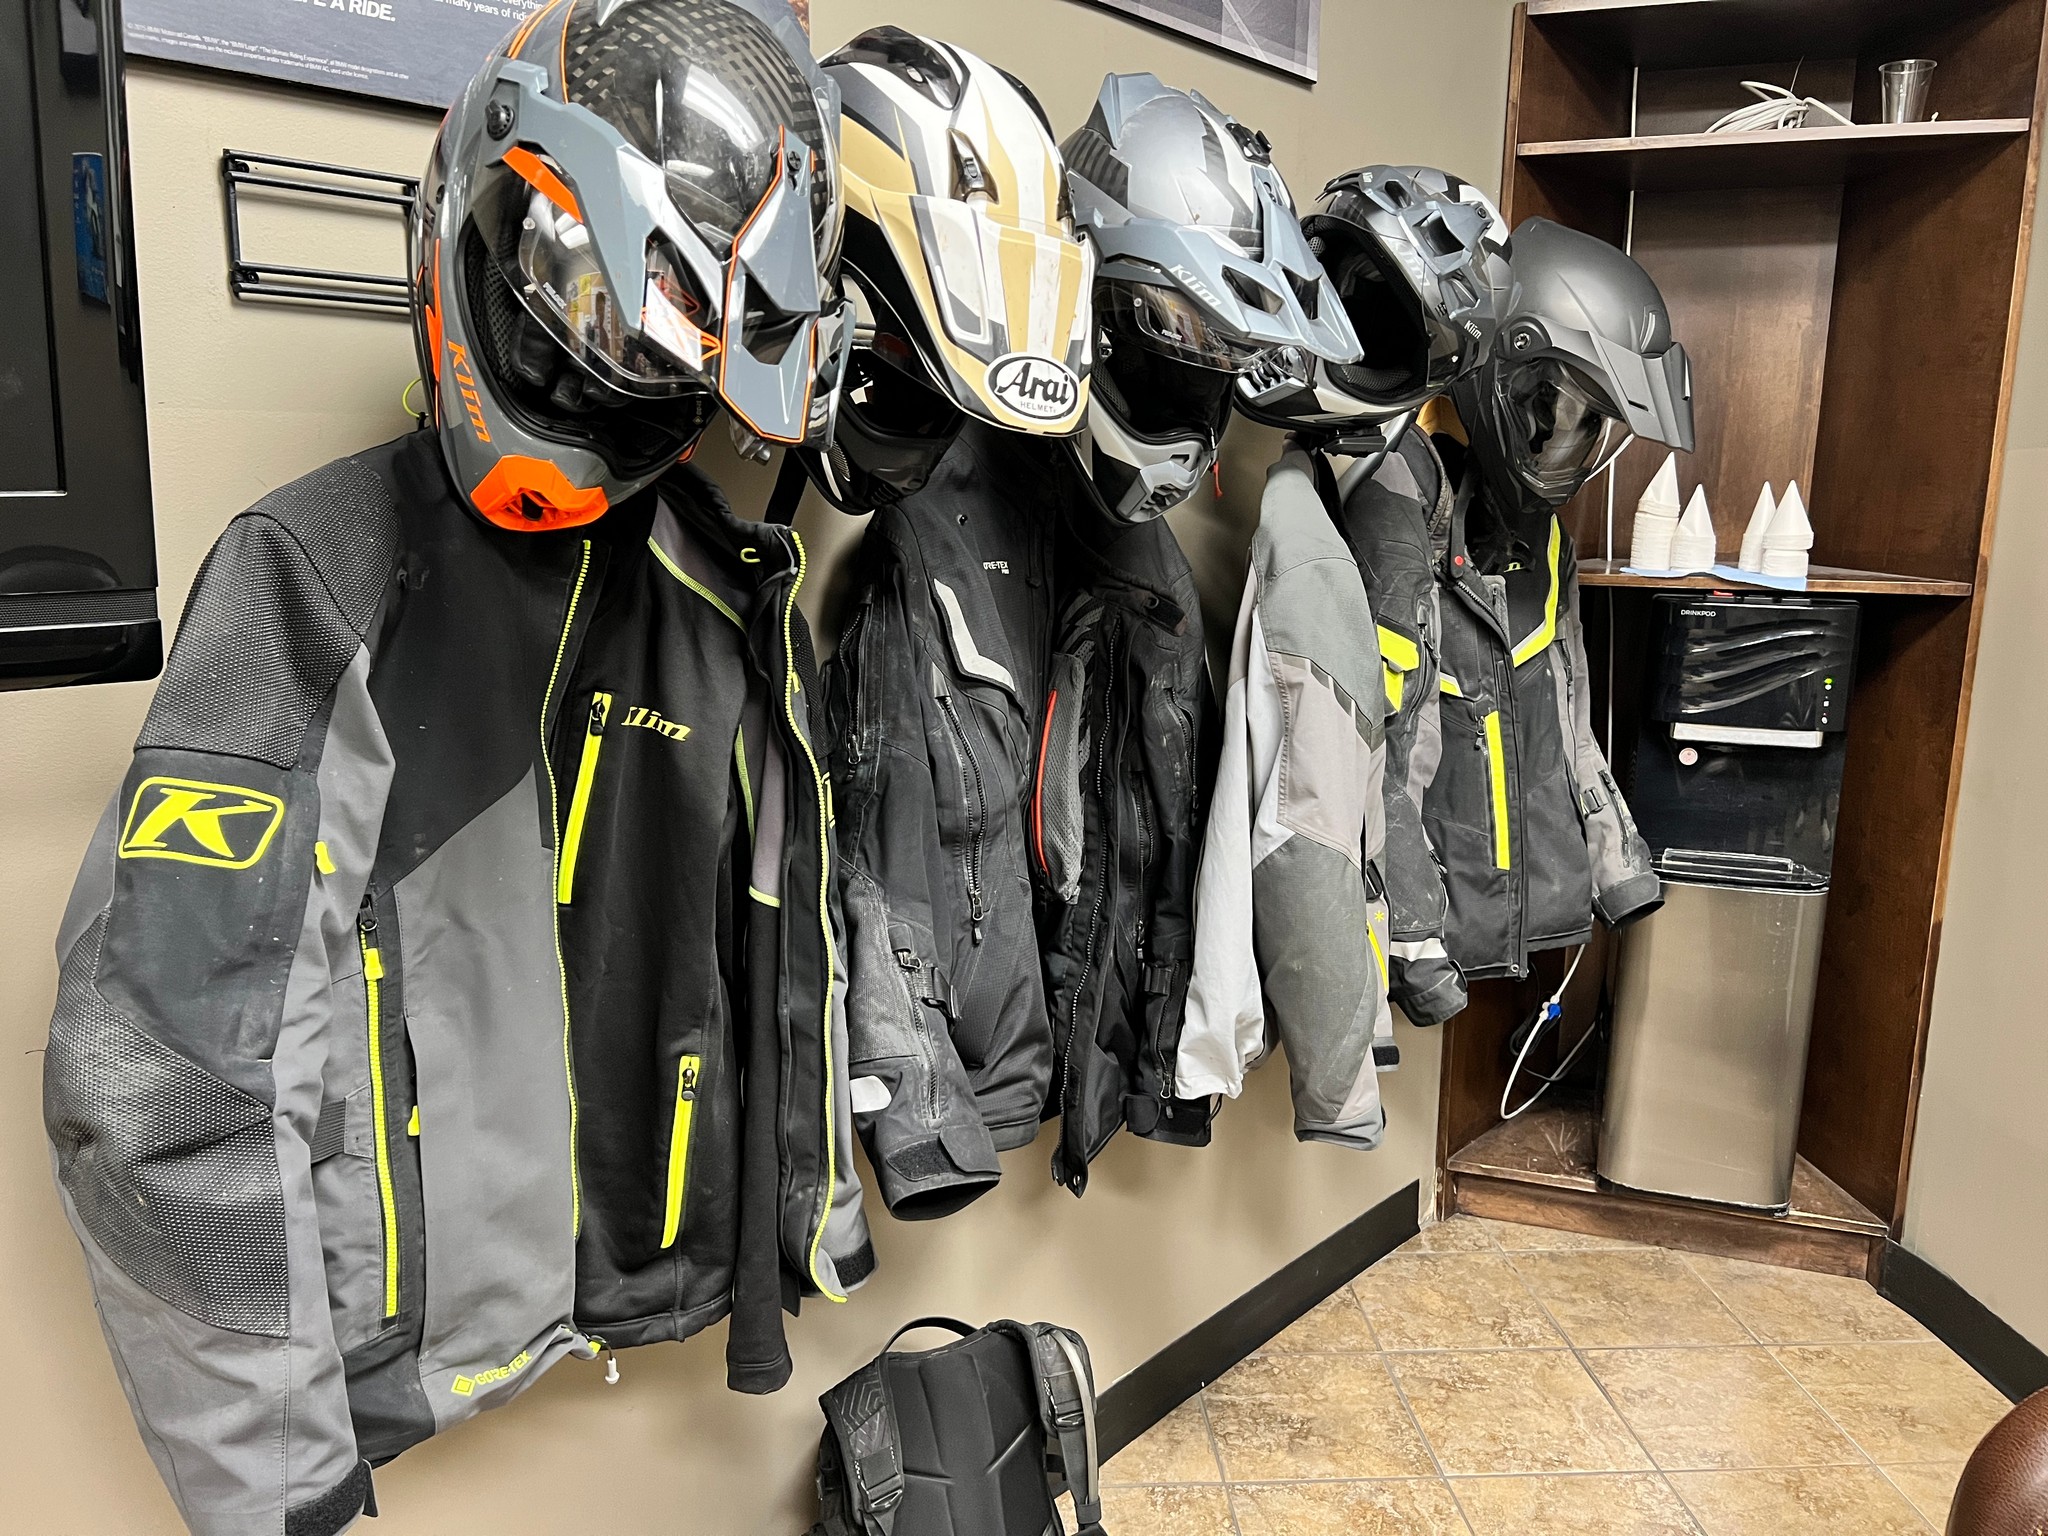 The lineup of jackets and helmets used on the long ride south to the Mexico border.